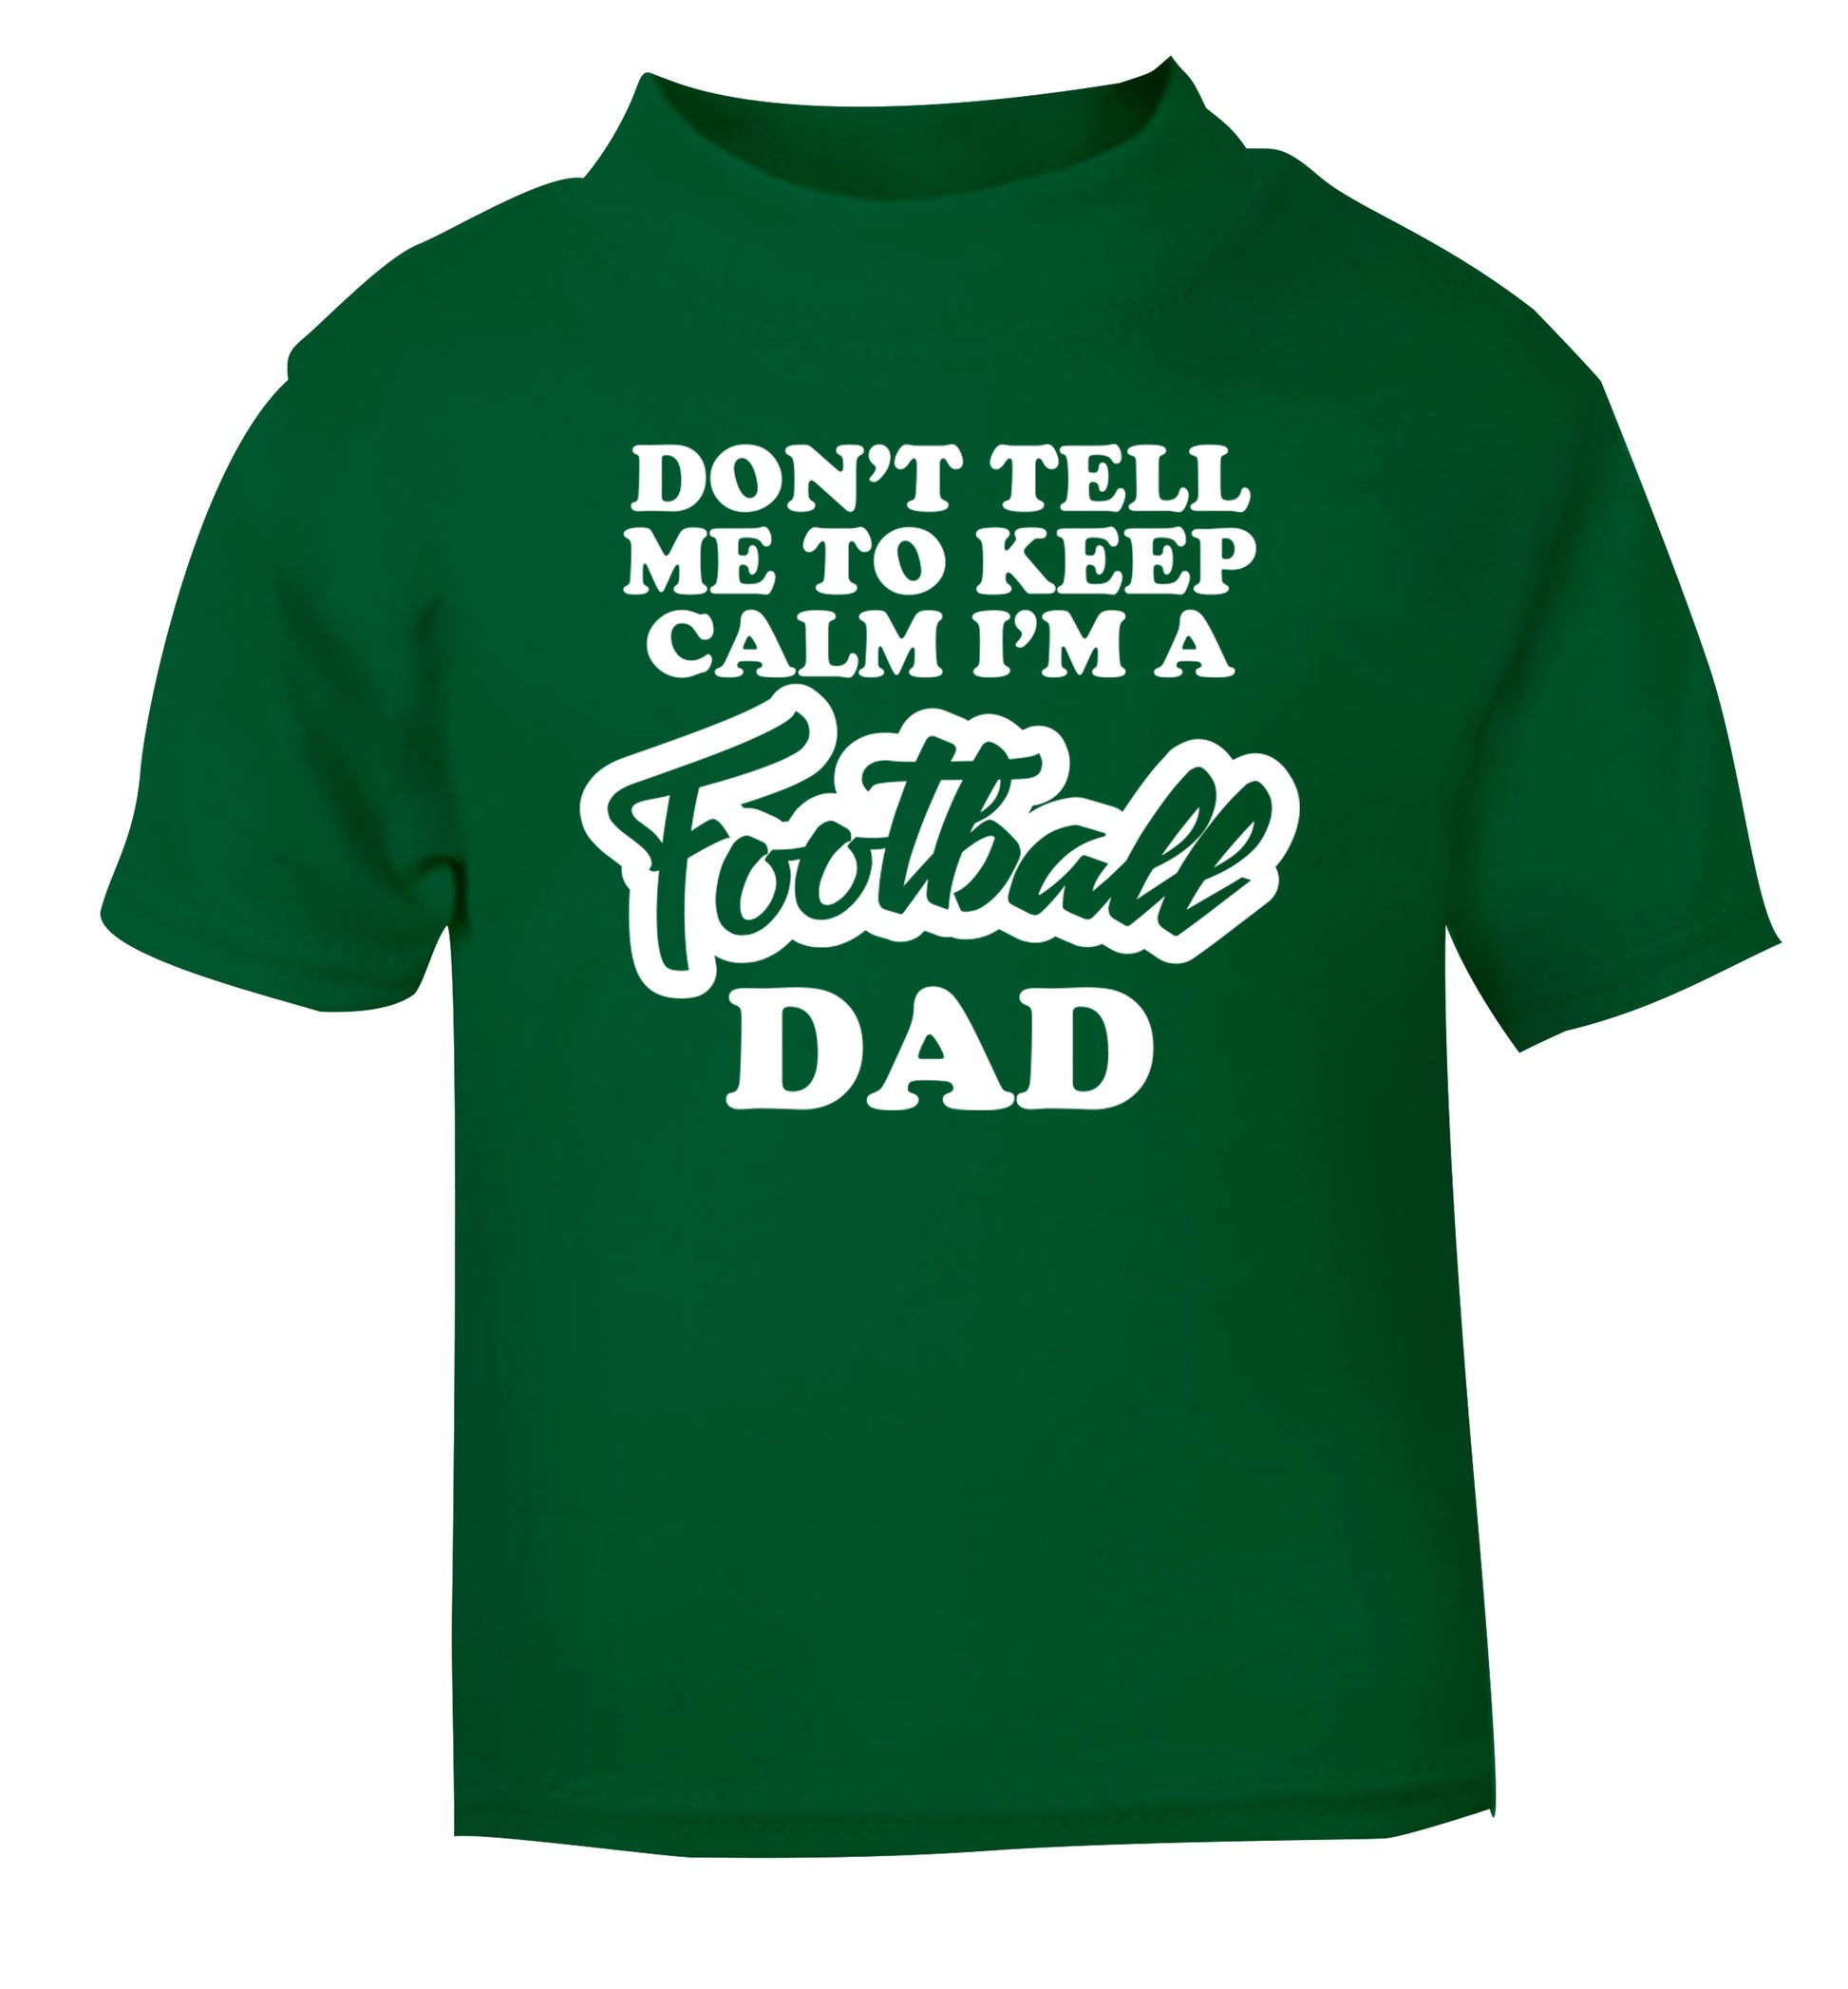 Don't tell me to keep calm I'm a football dad green Baby Toddler Tshirt 2 Years